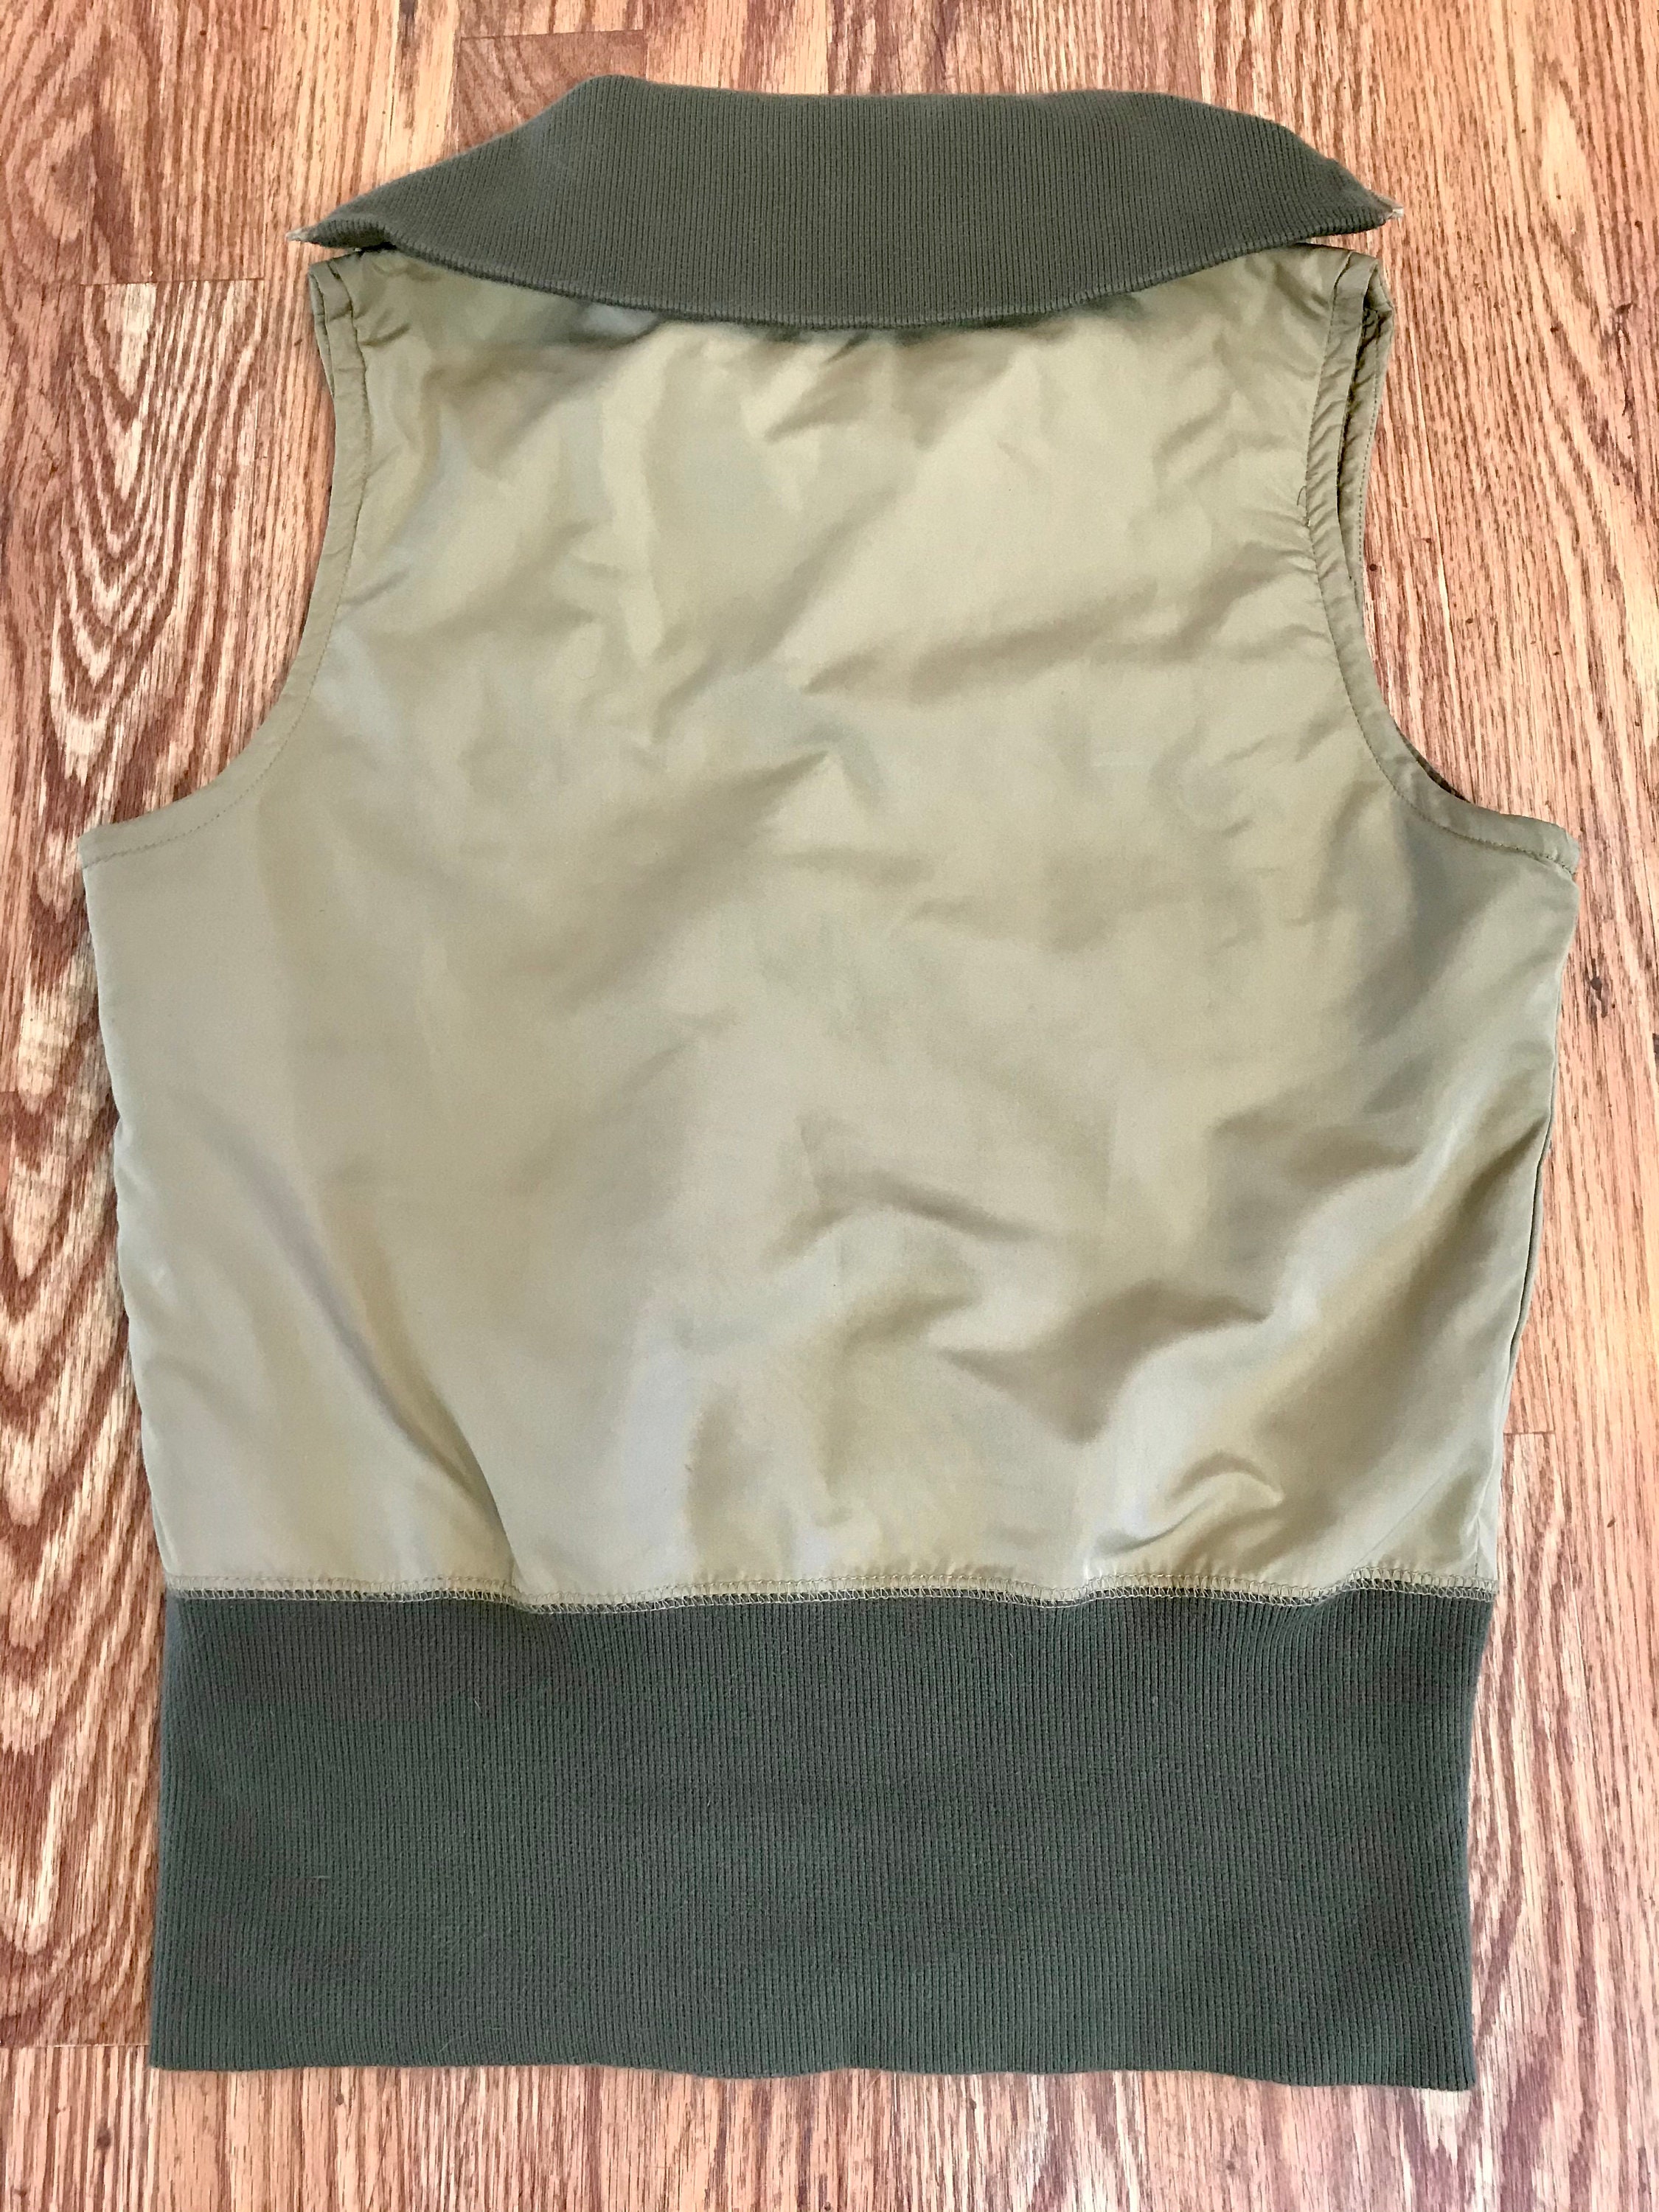 Womens Columbia Green Reversible Zip up Vest Small | Etsy